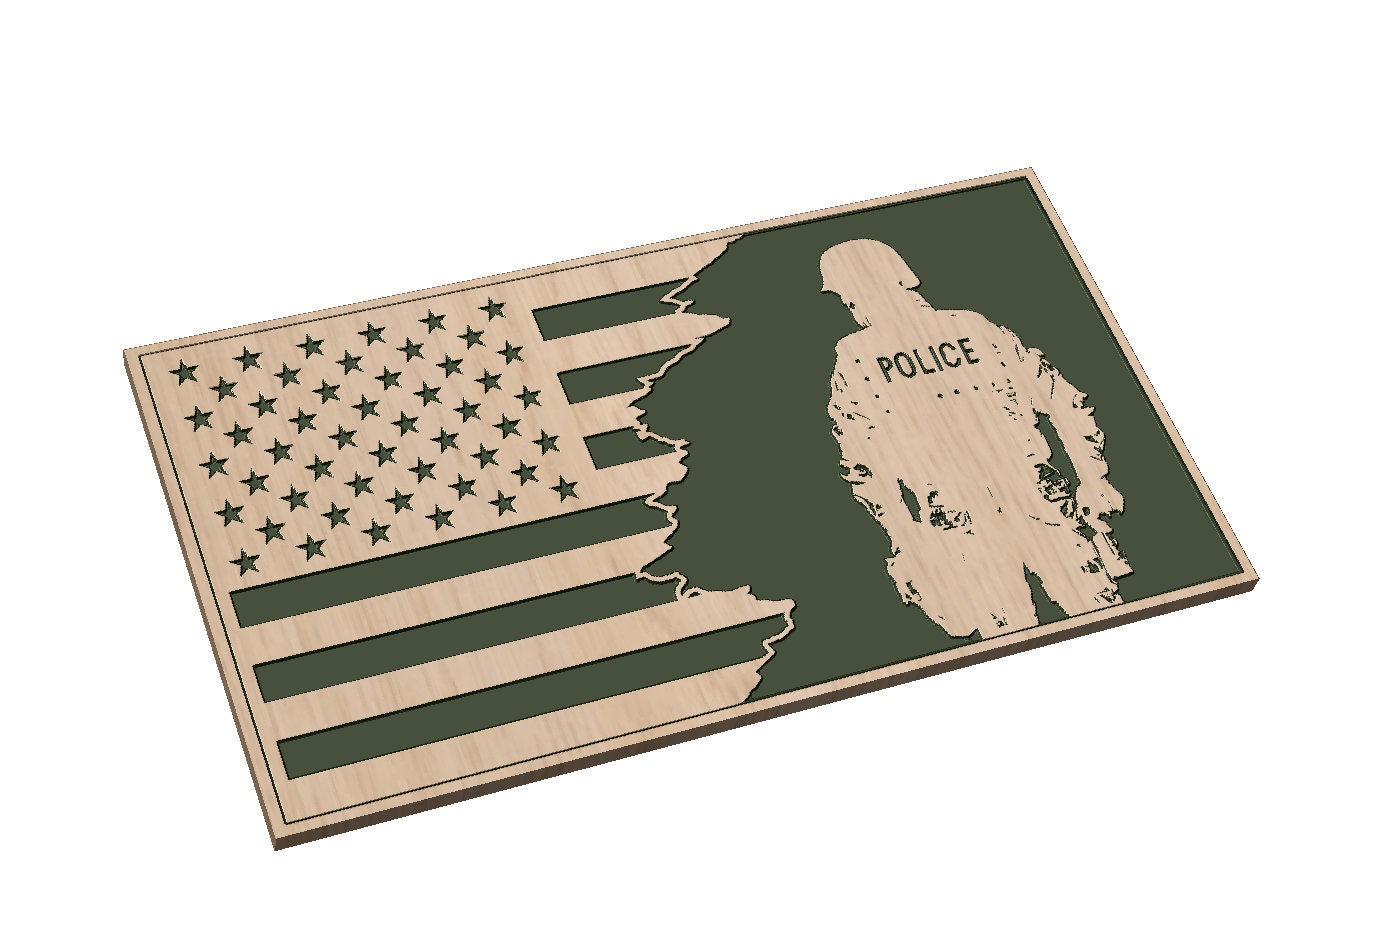 Tattered 3 Flag with Officer Silhouette